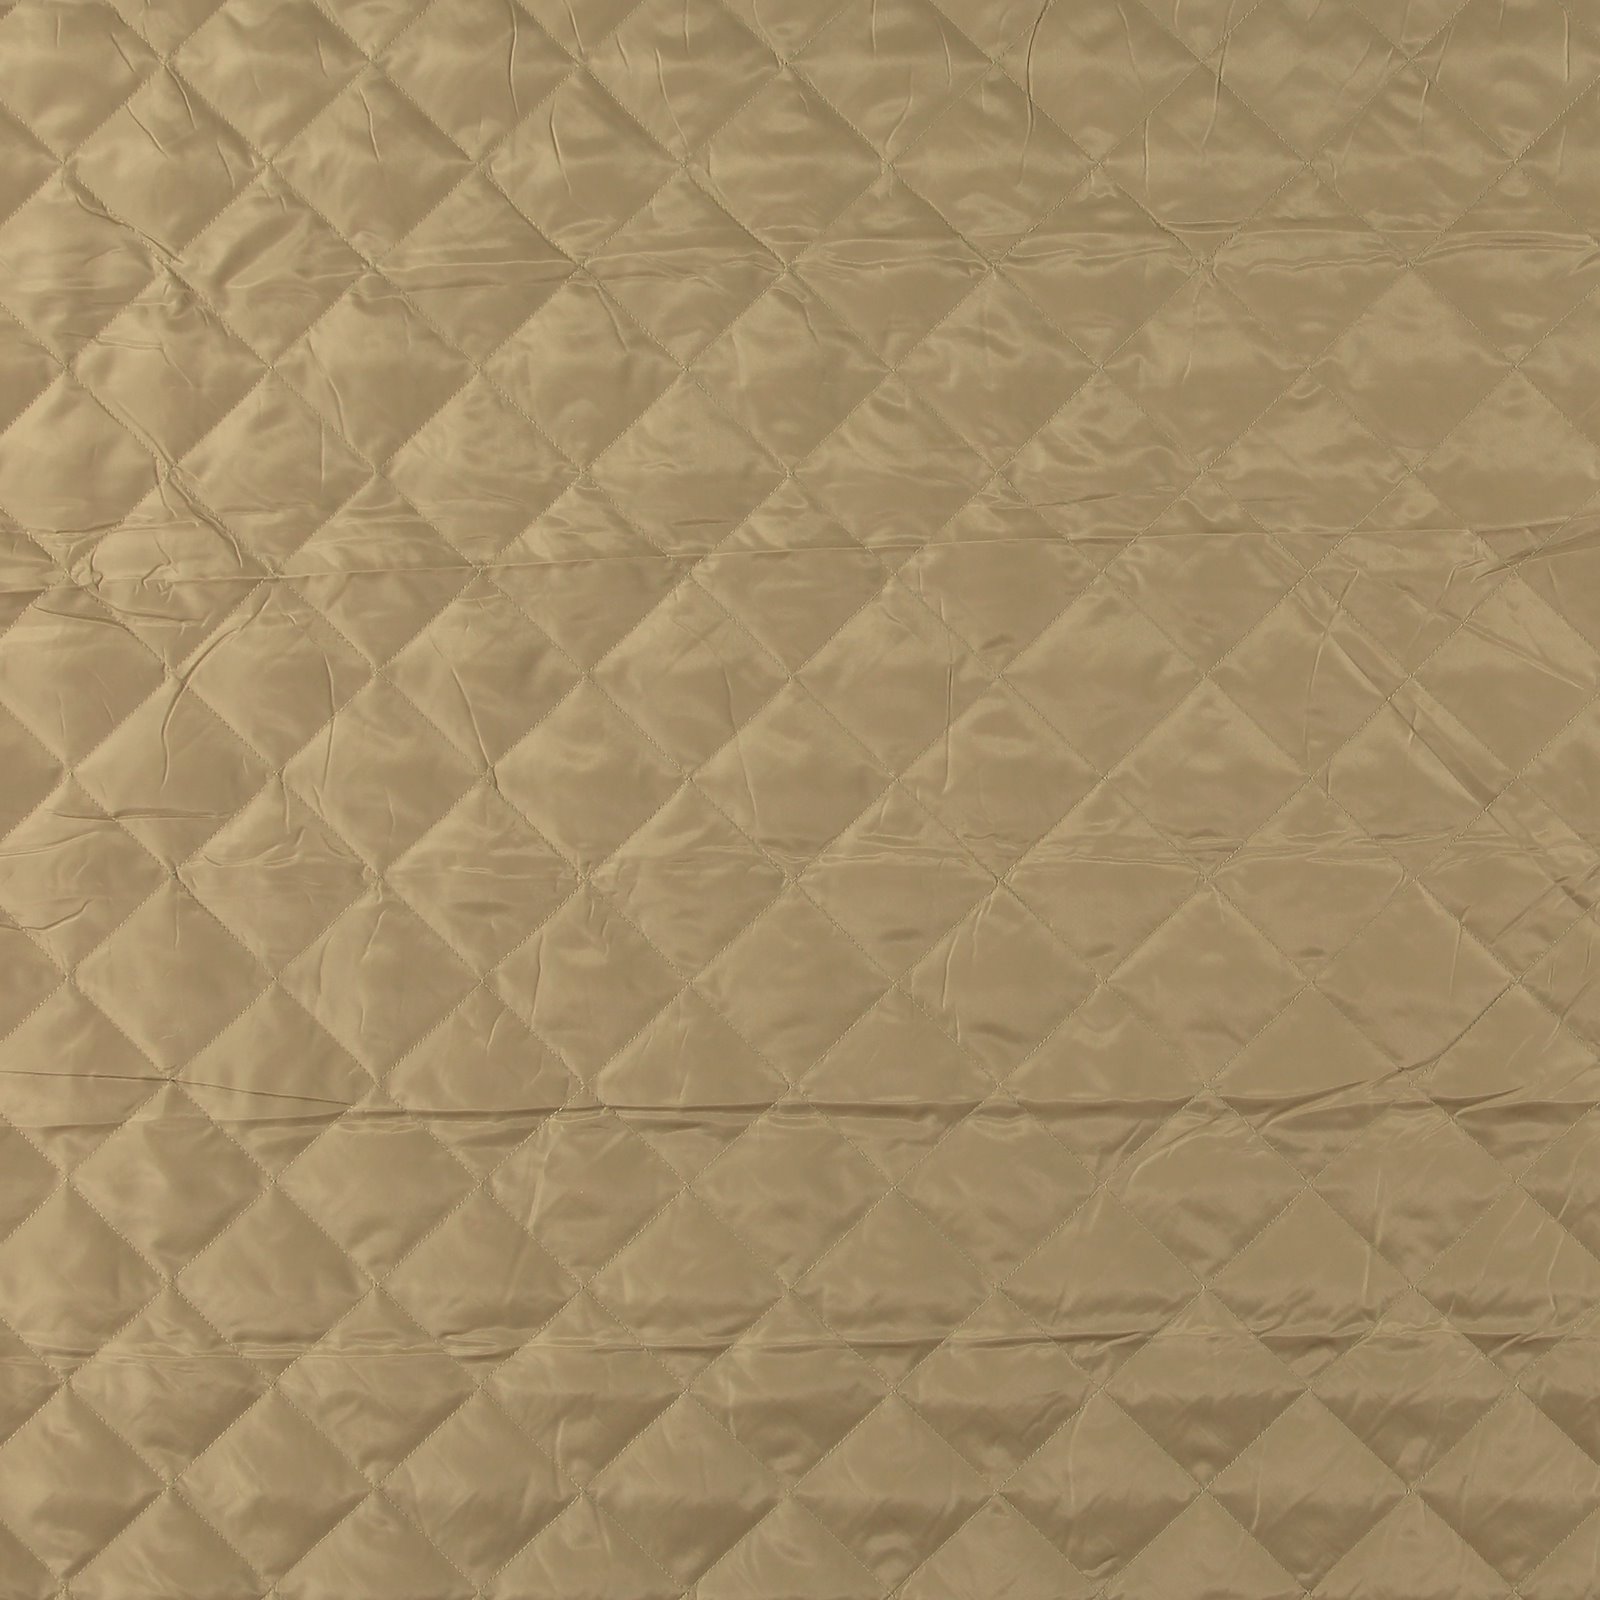 Woven quilt dark beige with lining 920233_pack_sp